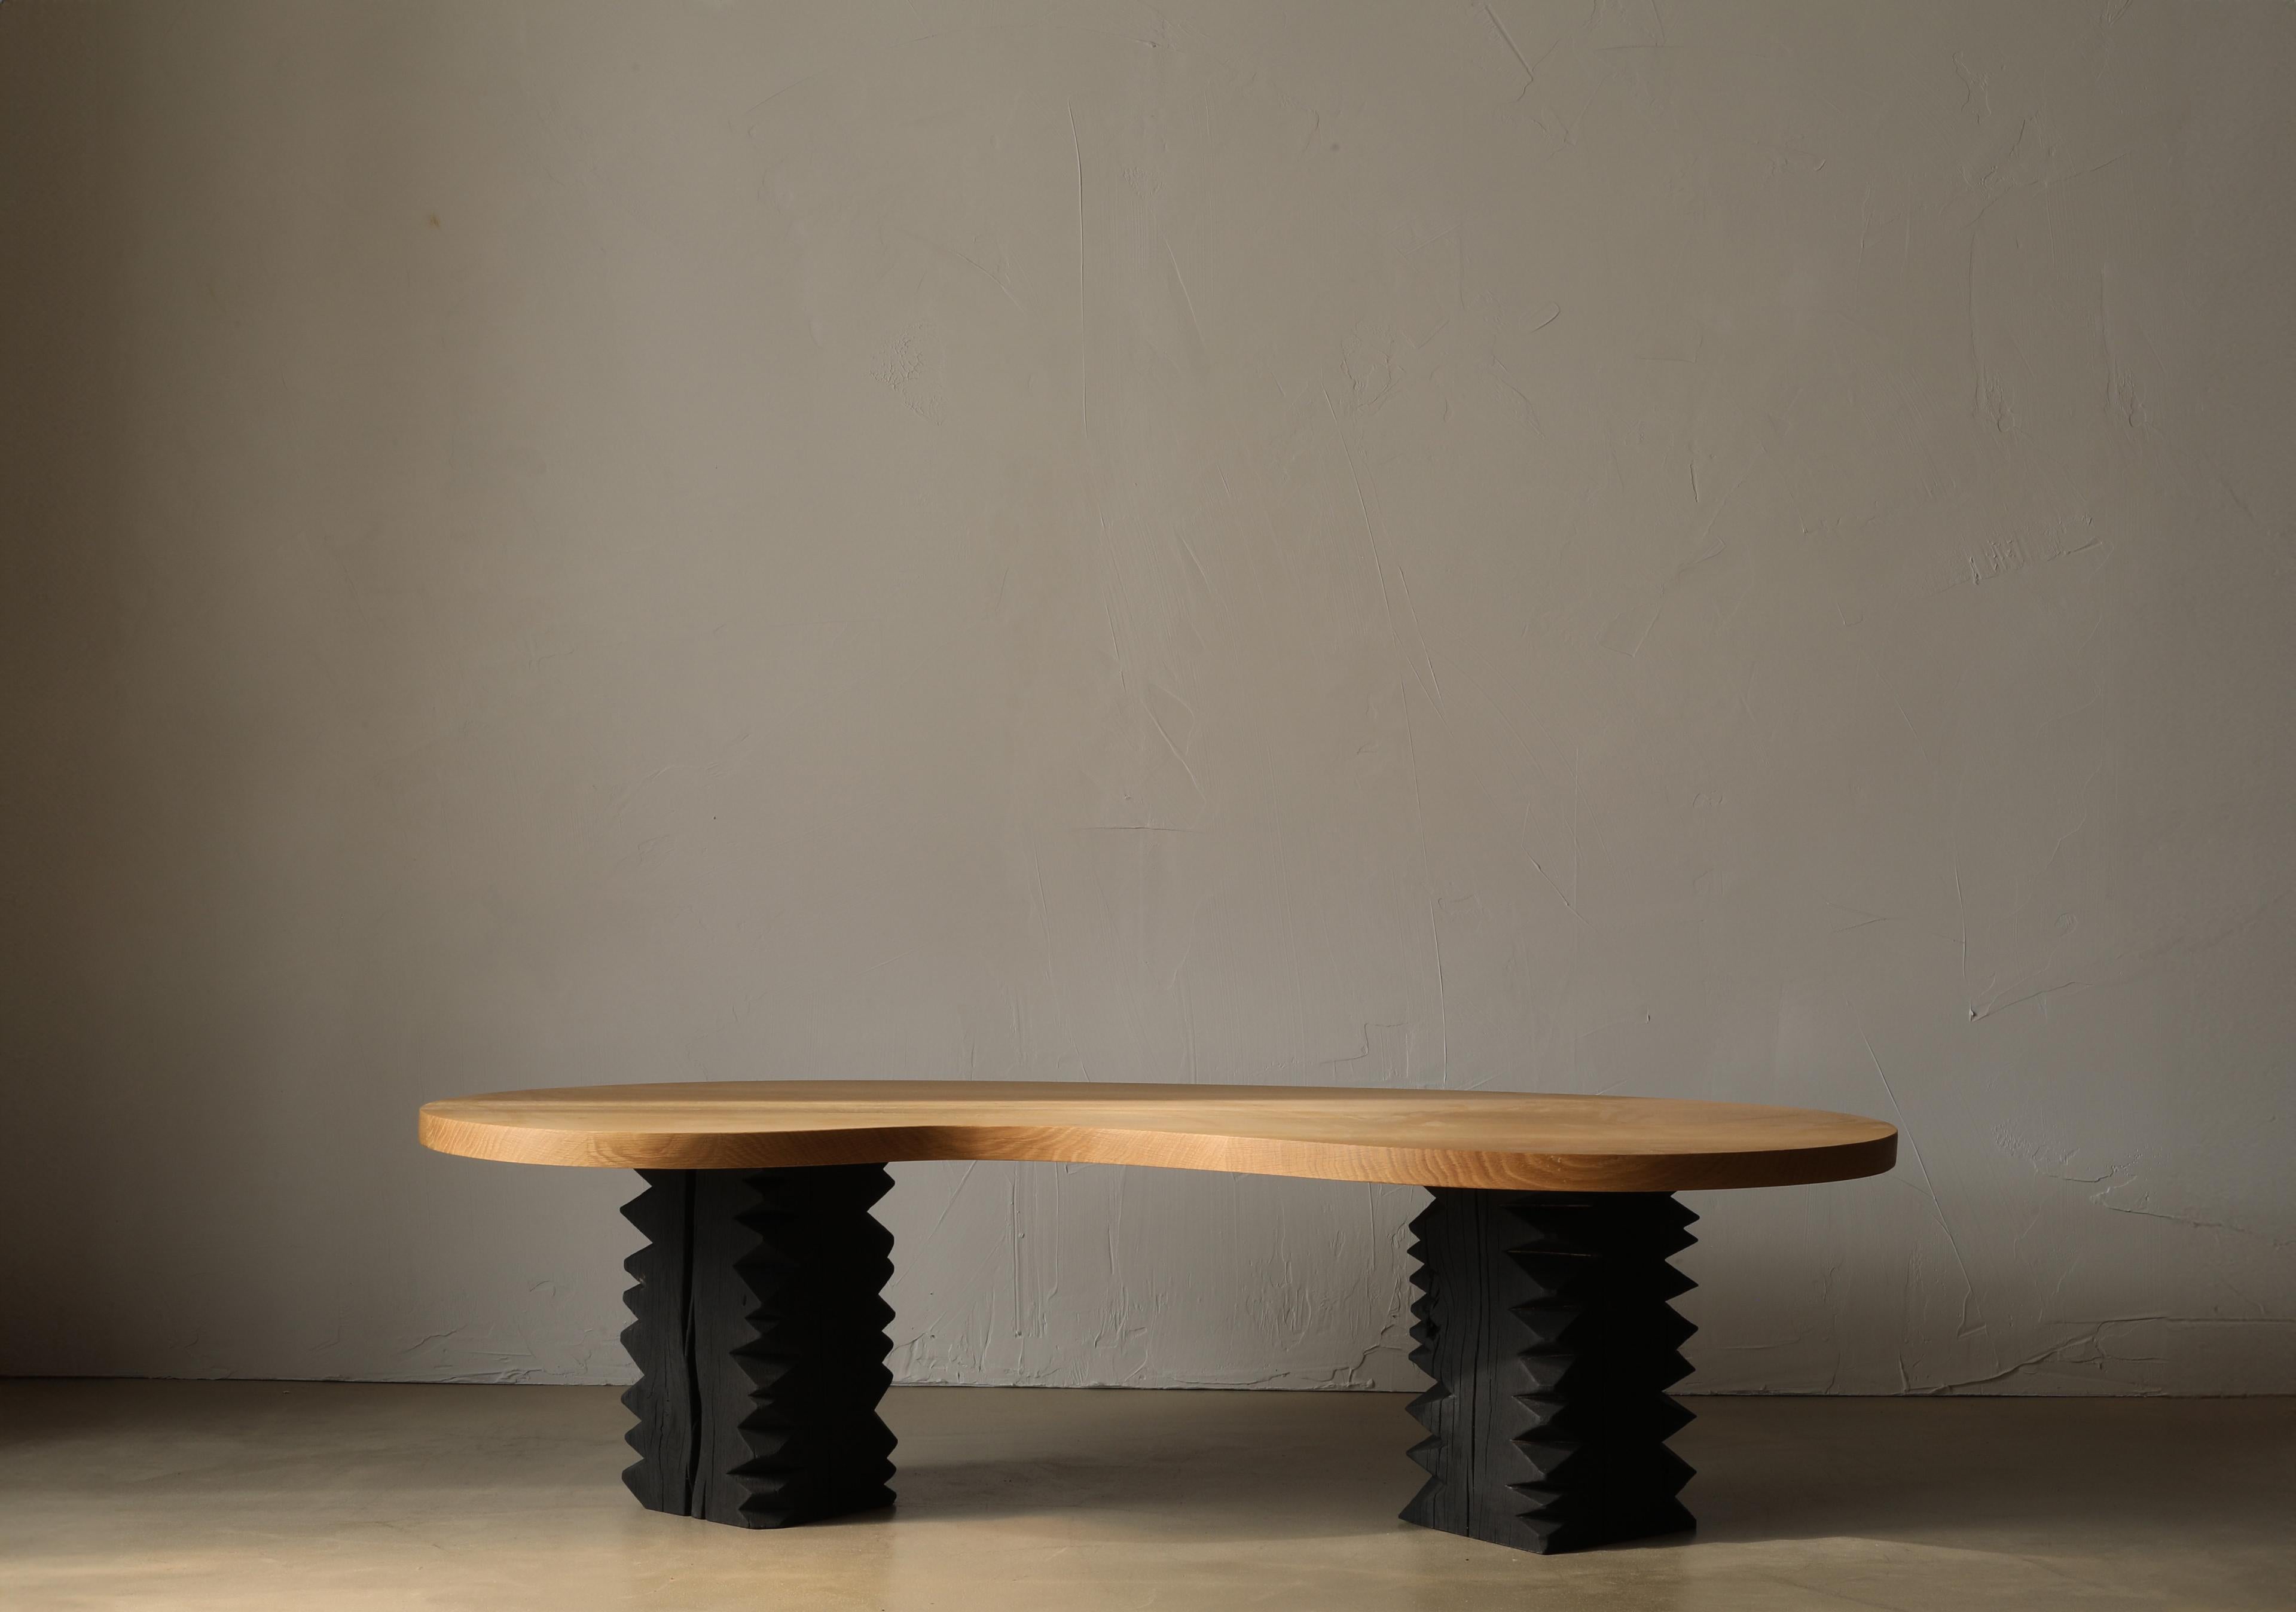 The Notch II coffee table is built from two solid pedestal legs and a large bean-shaped white oak top.

This collection finds its foundation in ‘cribbage’,  a rough-cut lumber used to build support structures called ‘cribs’ in coal mines. This